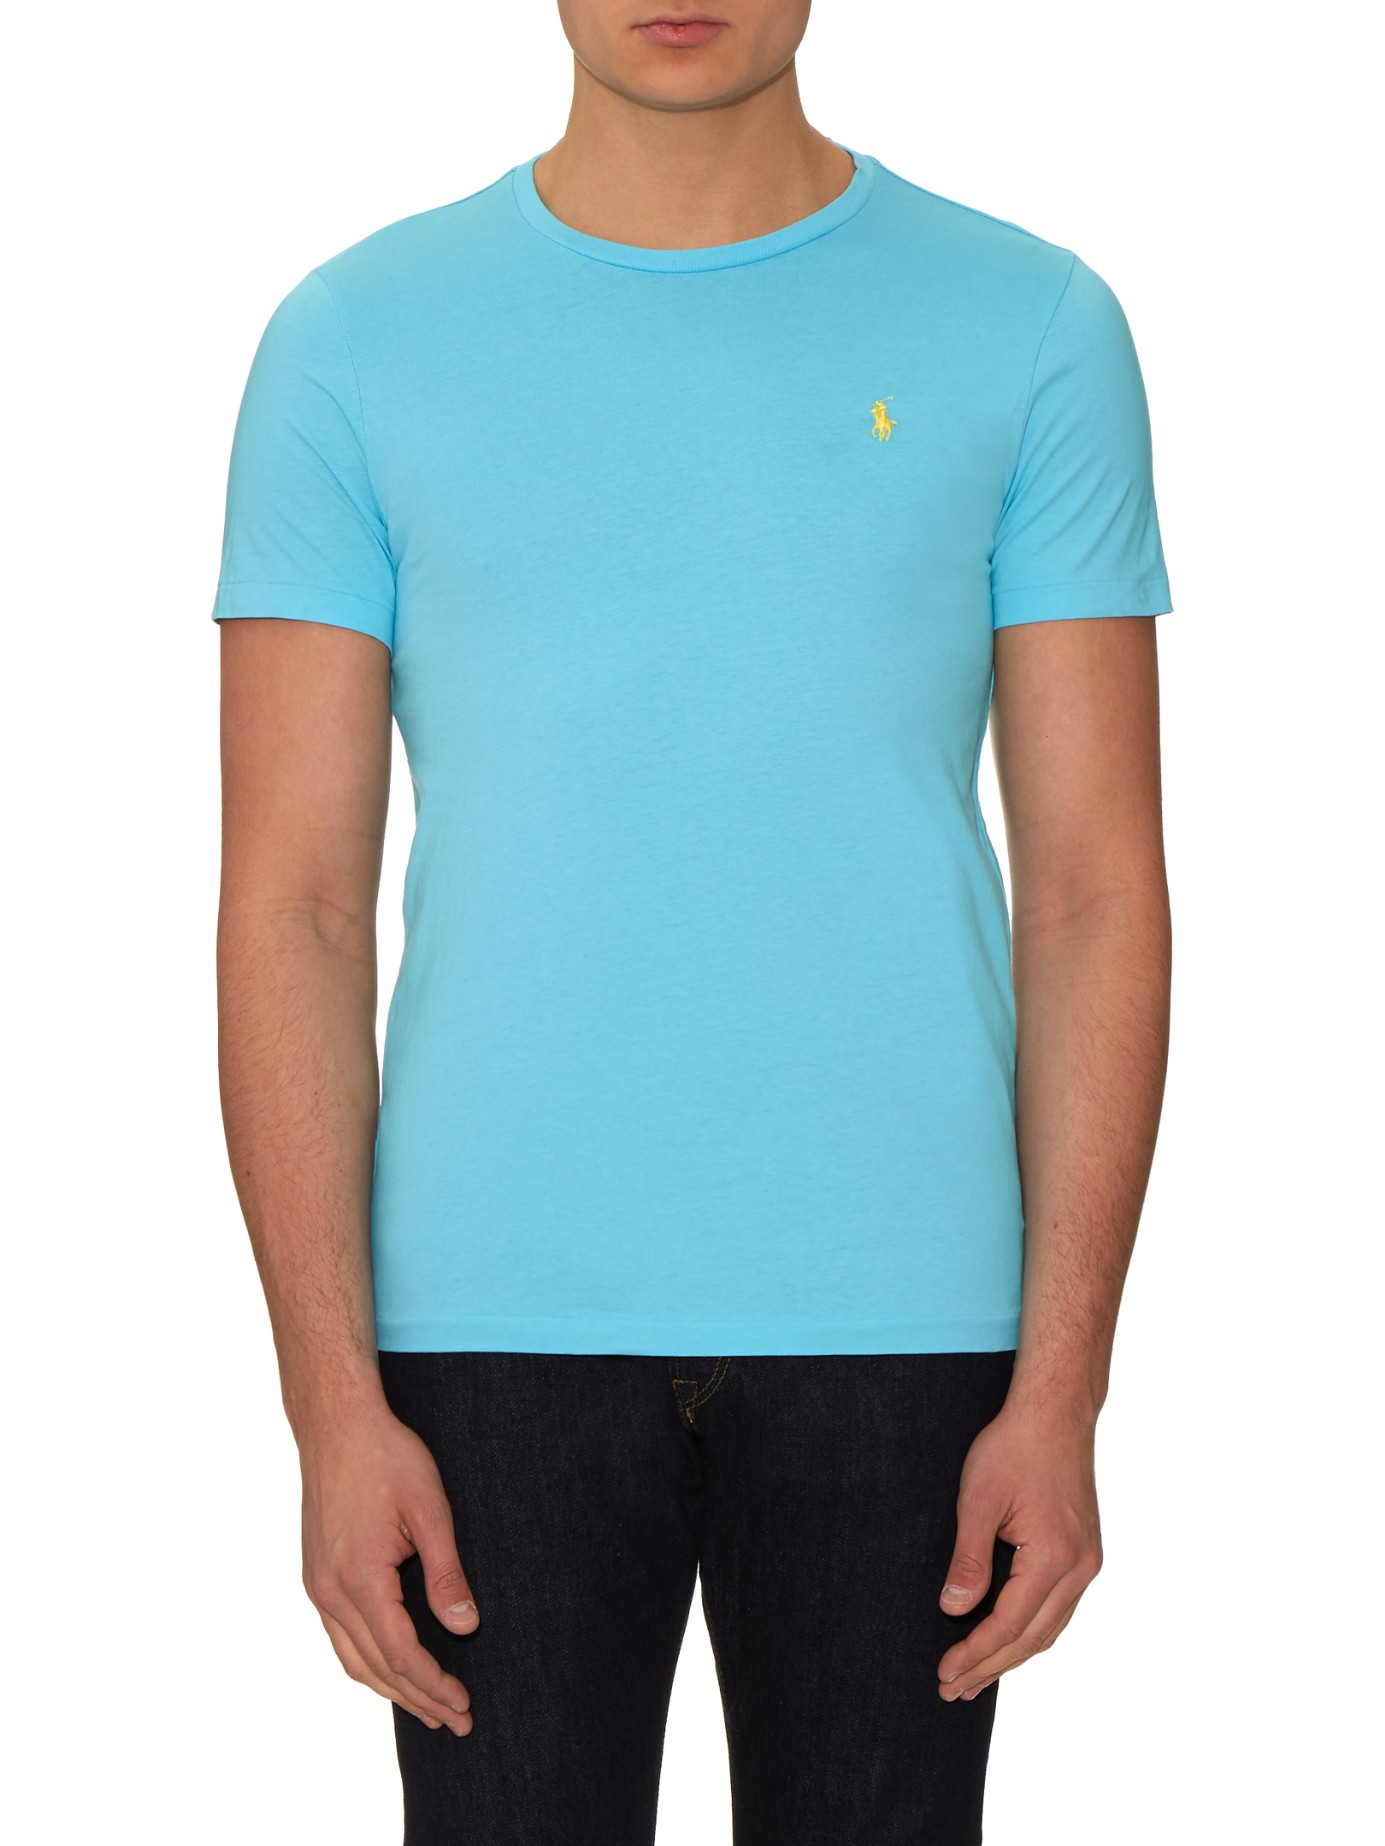 Lyst - Polo ralph lauren Logo-embroidered Cotton T-shirt in Blue for Men